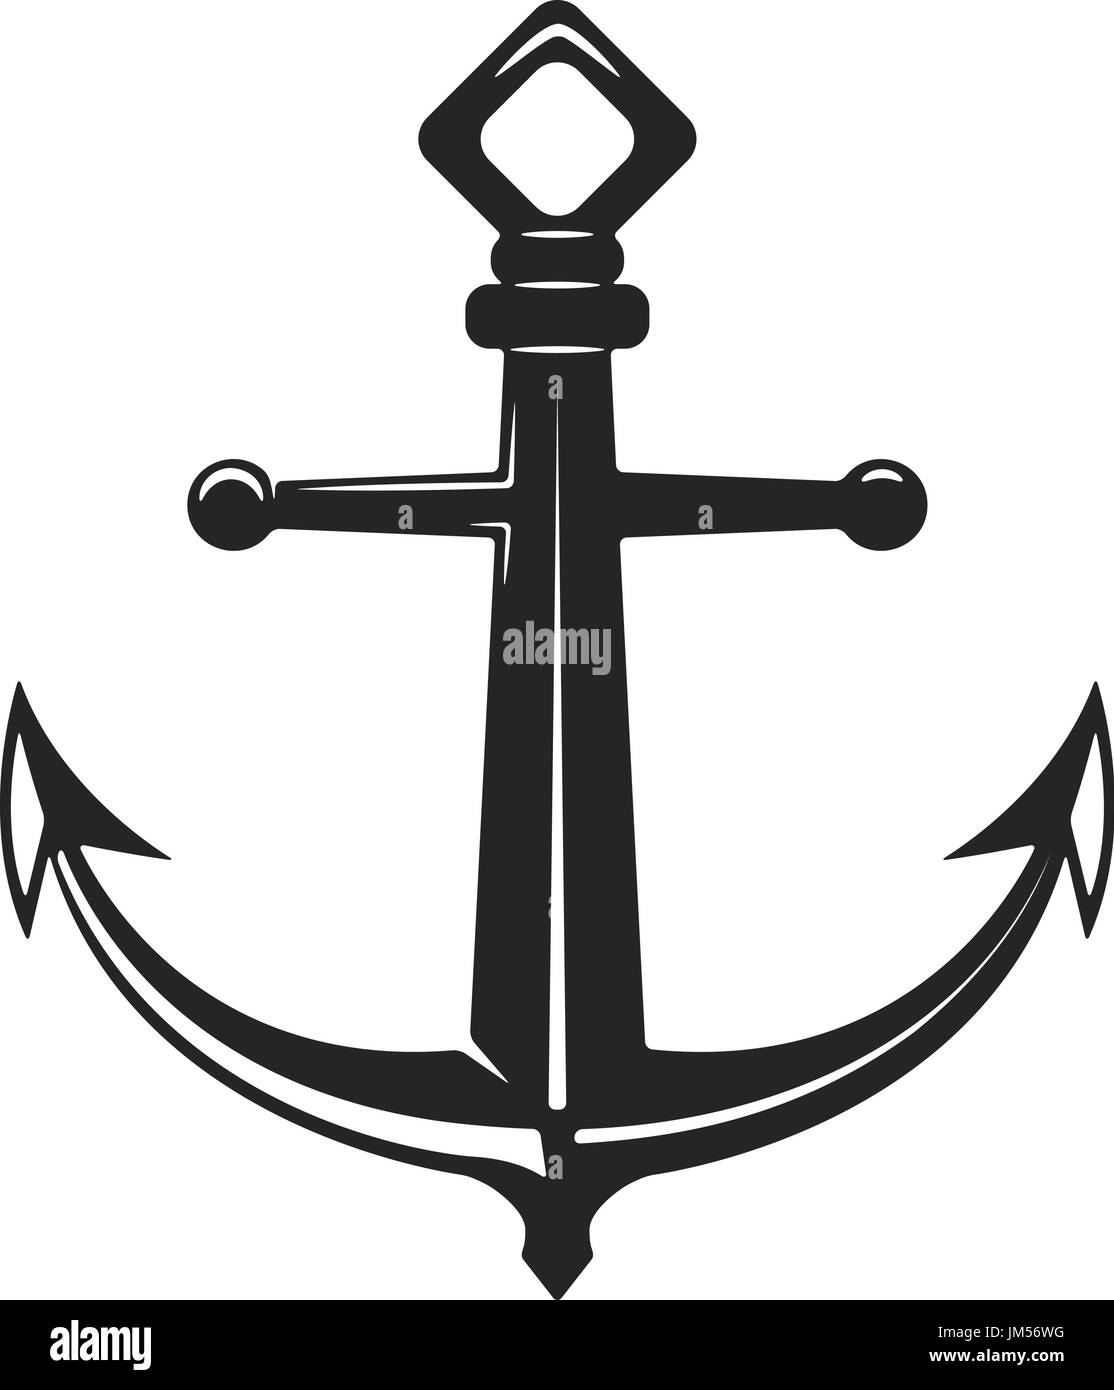 Vintage anchor illustration isolated on white background. Vector illustration Stock Vector